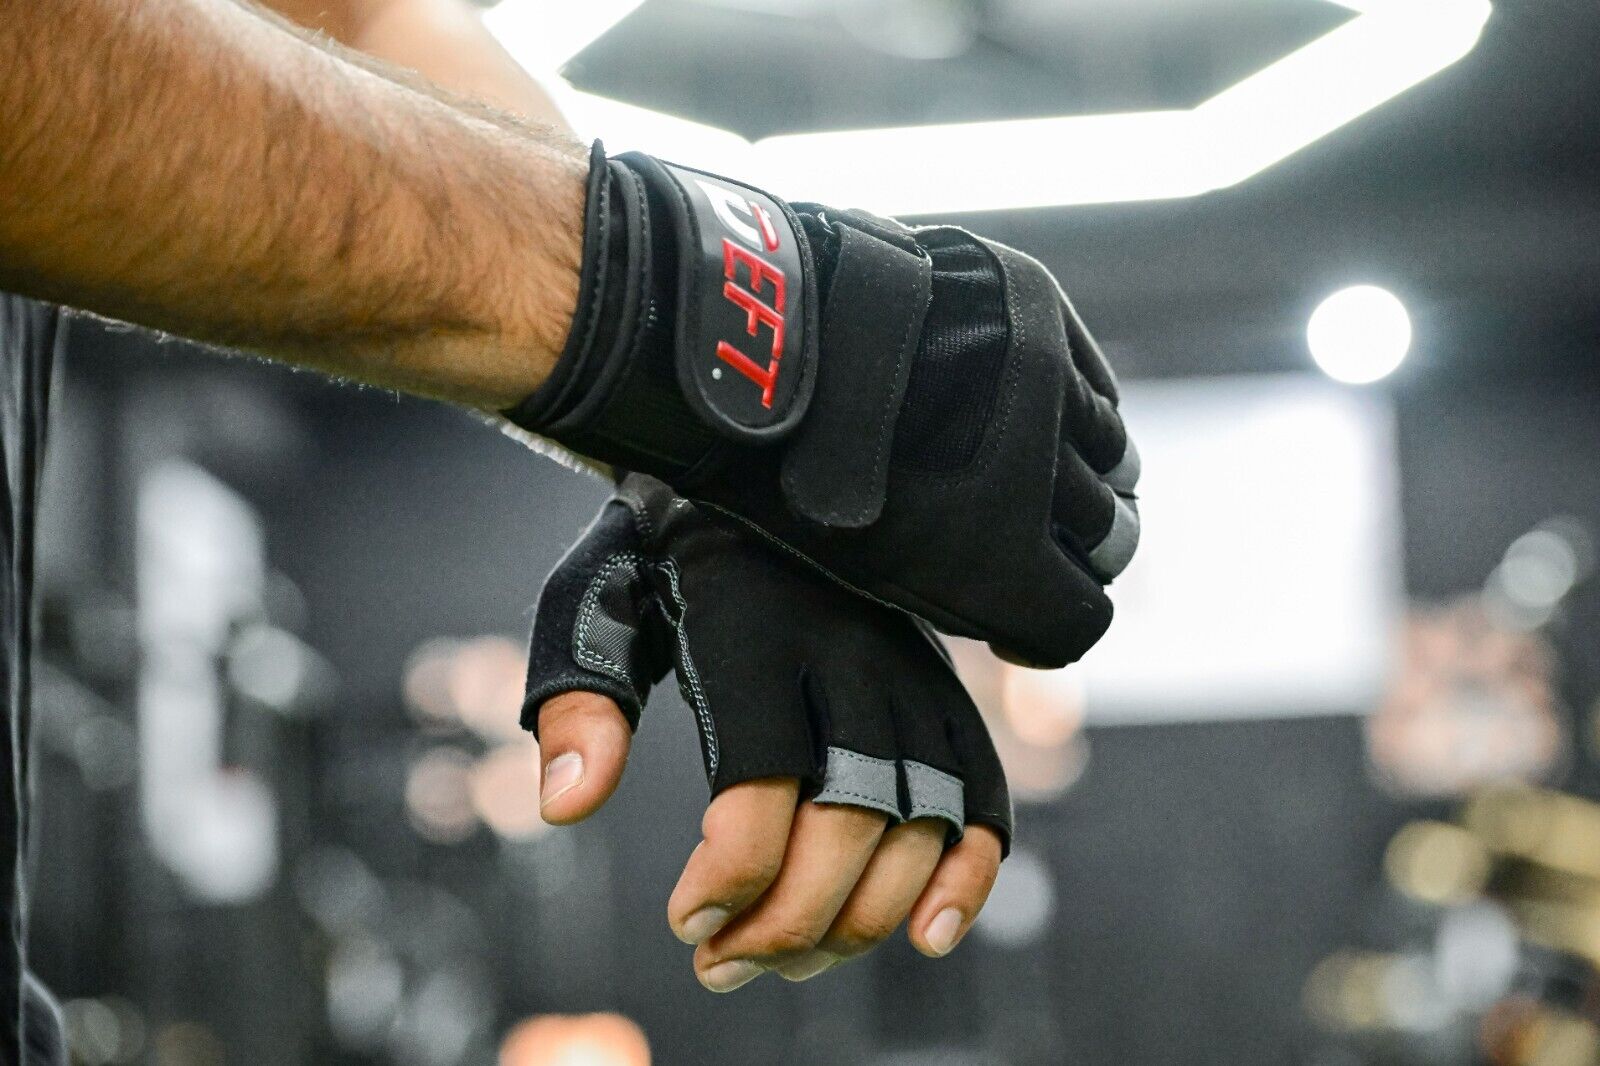 Weightlifting Gloves for Gym Bodybuilding and Exercise